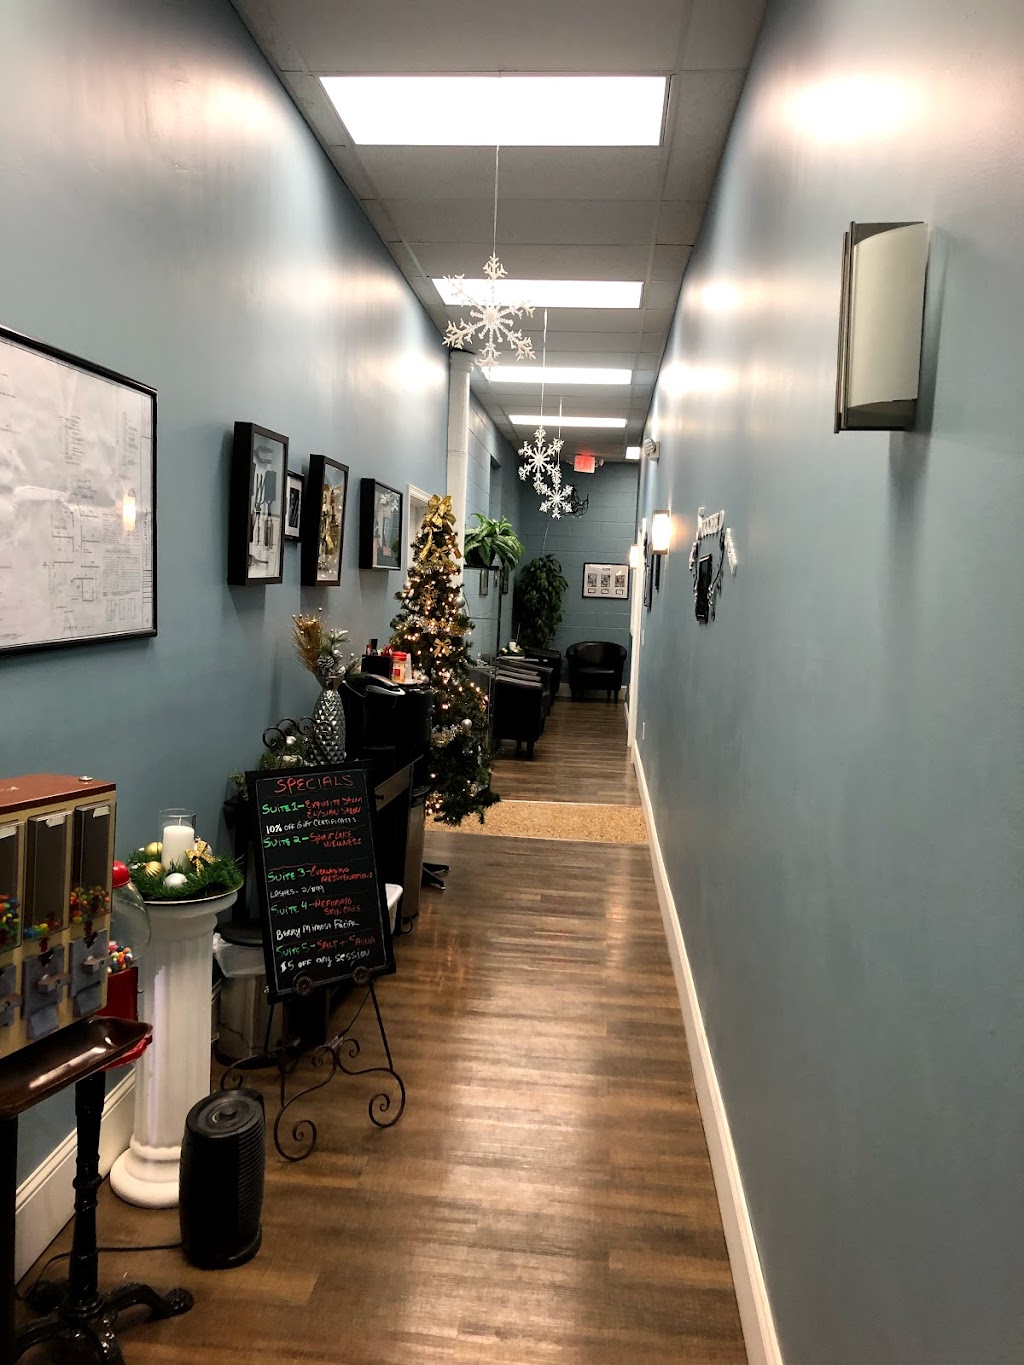 Aspire Salon Suites LLC | 507 Hitchcock Street and Front Entrance, 520 South Blvd, Baraboo, WI 53913, USA | Phone: (608) 393-5886